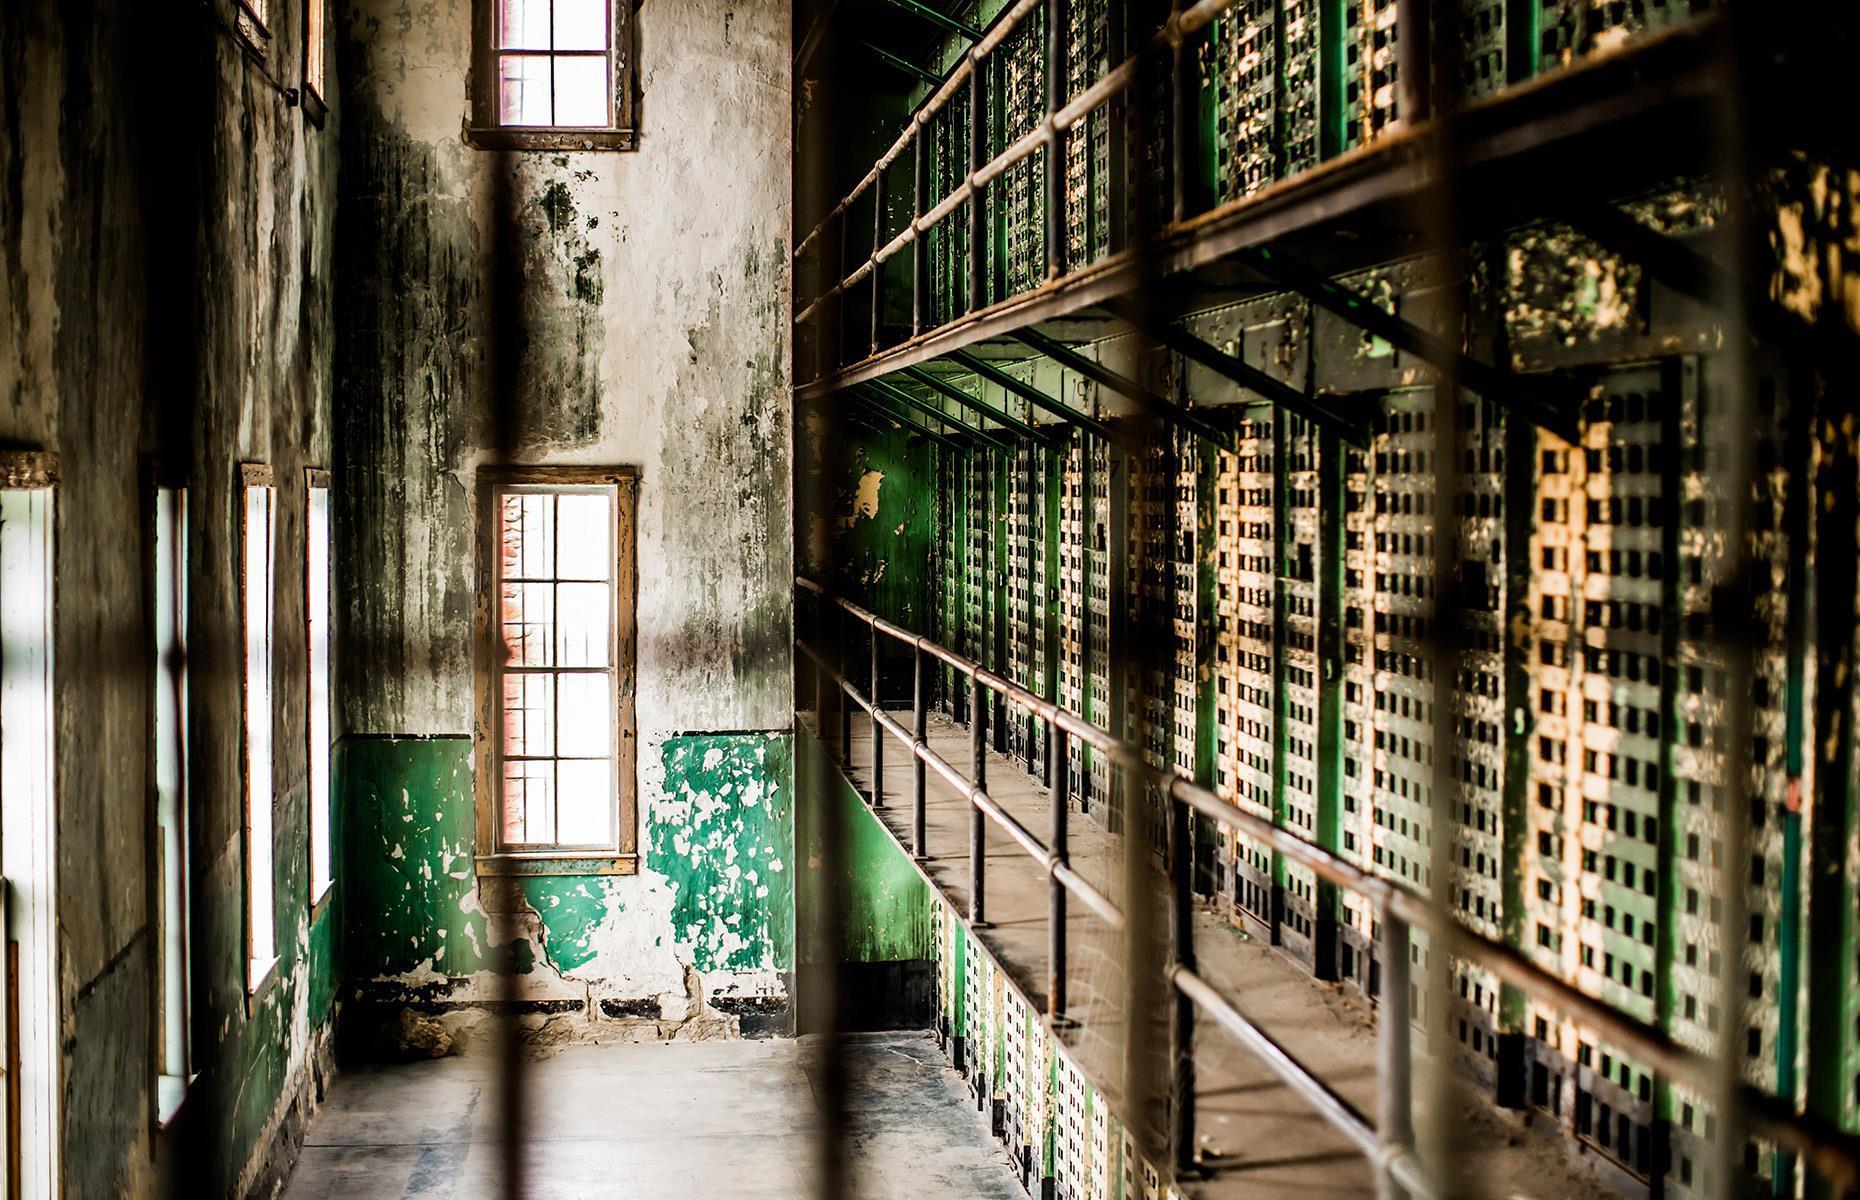 <p>As if a rattling, abandoned prison wasn't sinister enough, this one is said to be filled with the spirits of inmates past. <a href="https://history.idaho.gov/oldpen/">The Old Idaho Penitentiary</a> has a history dating back to the 1870s and, in its time in operation, it incarcerated some of the most formidable criminals in the country. The ghost of one prisoner in particular – "Idaho's Jack the Ripper", Raymond Allen Snowden, who died in 1957 – is particularly active. You might catch a ghostly glimpse of him on a Paranormal Investigation or a Behind the Scenes Tour.</p>